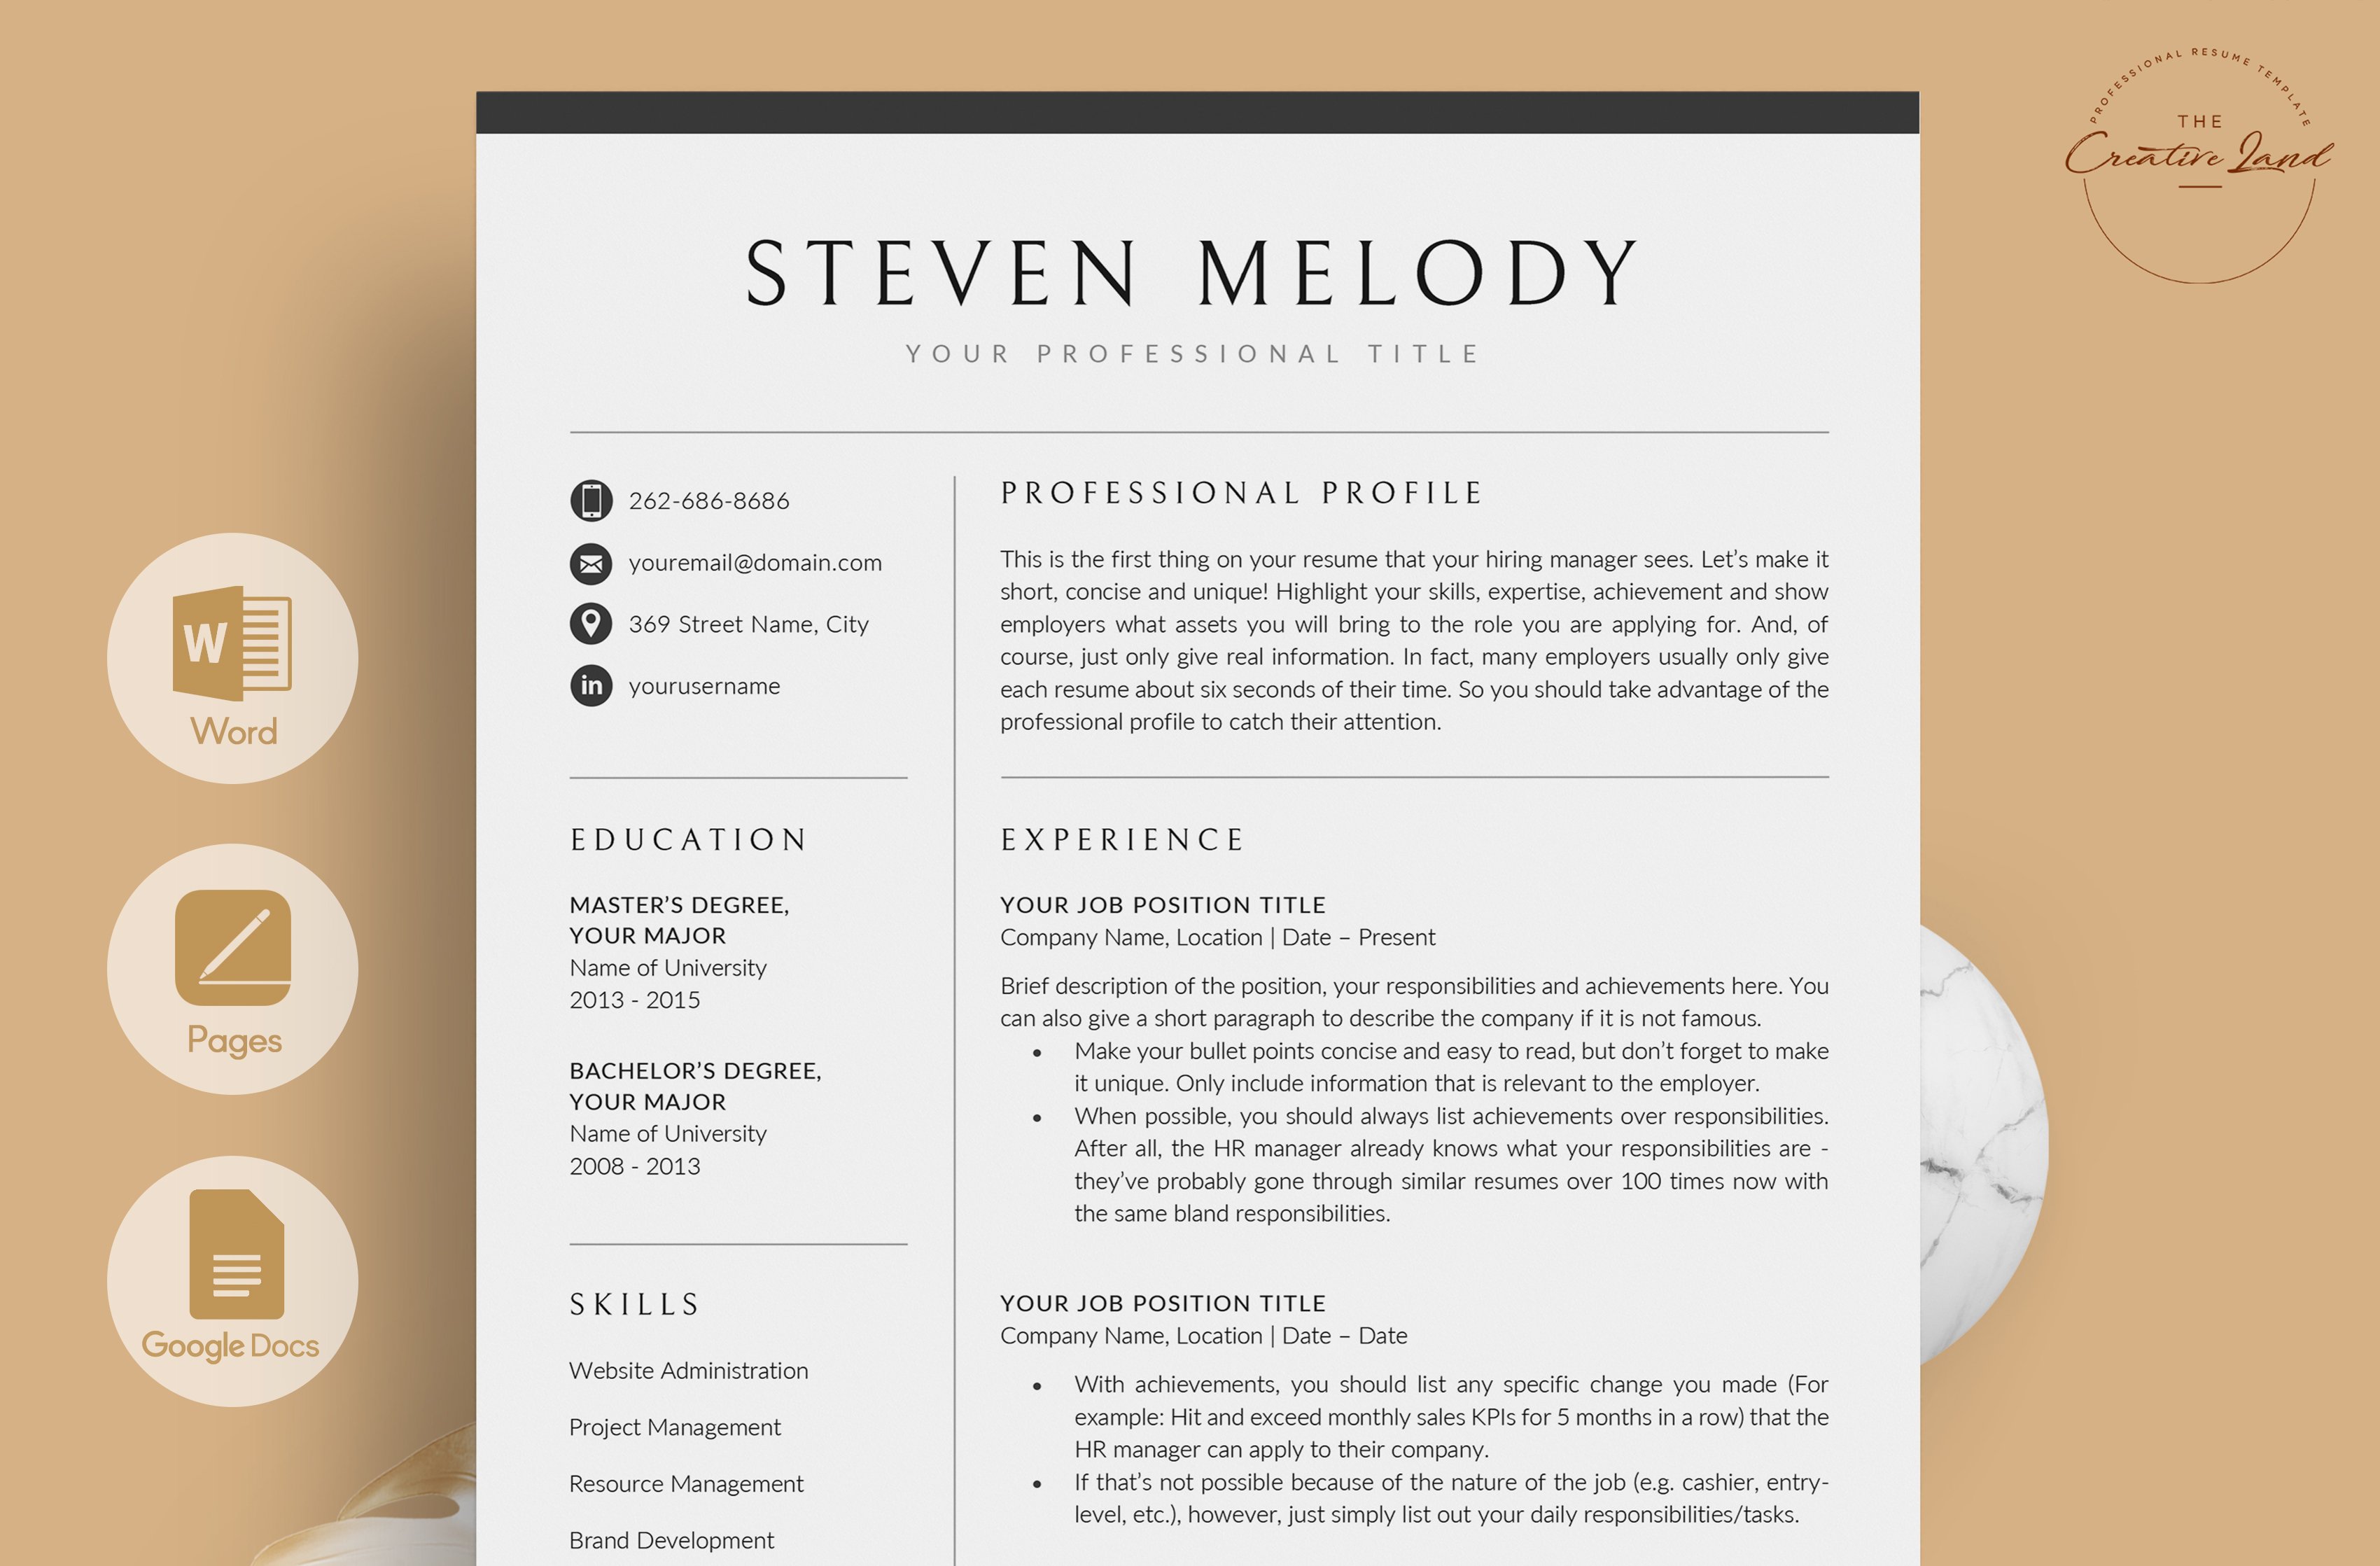 Resume/CV - The Melody cover image.